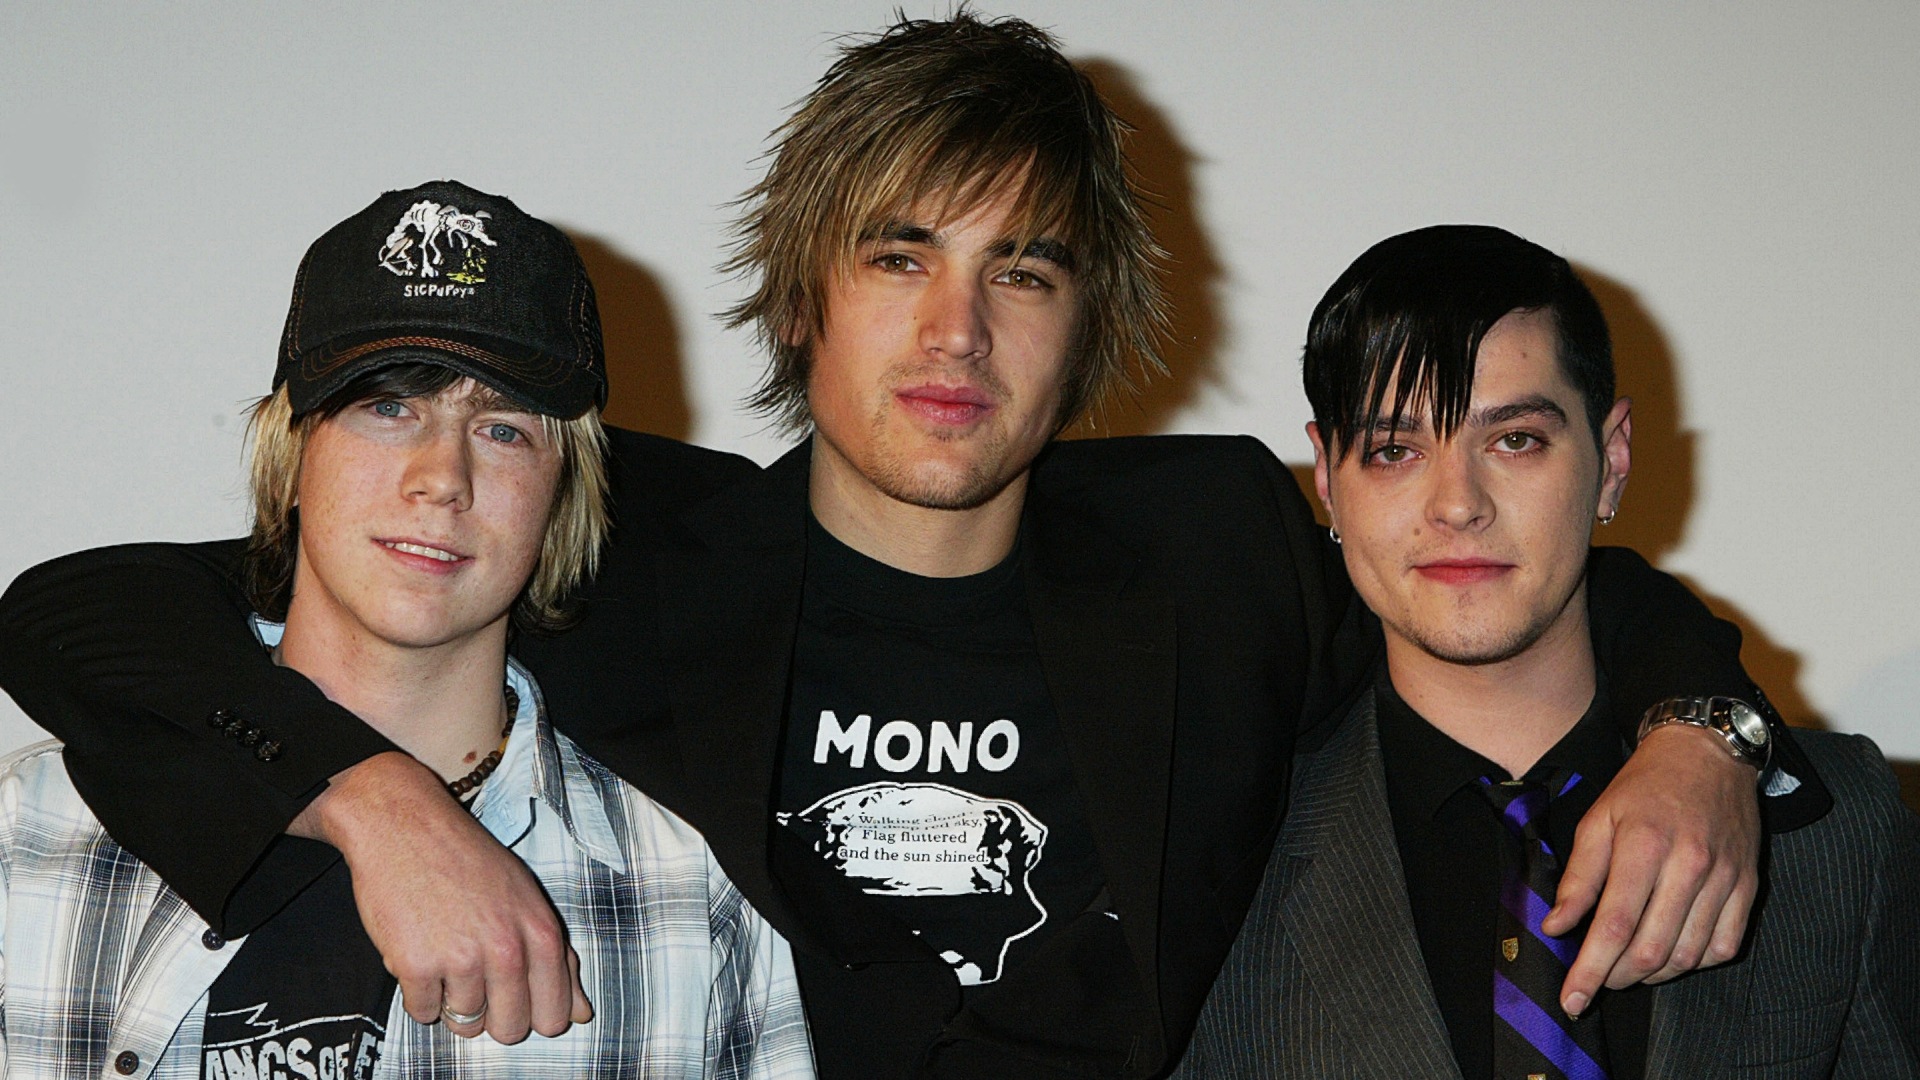 The trio of James Bourne, Charlie Simpson, and Matt Willis in January 14, 2005, in London.